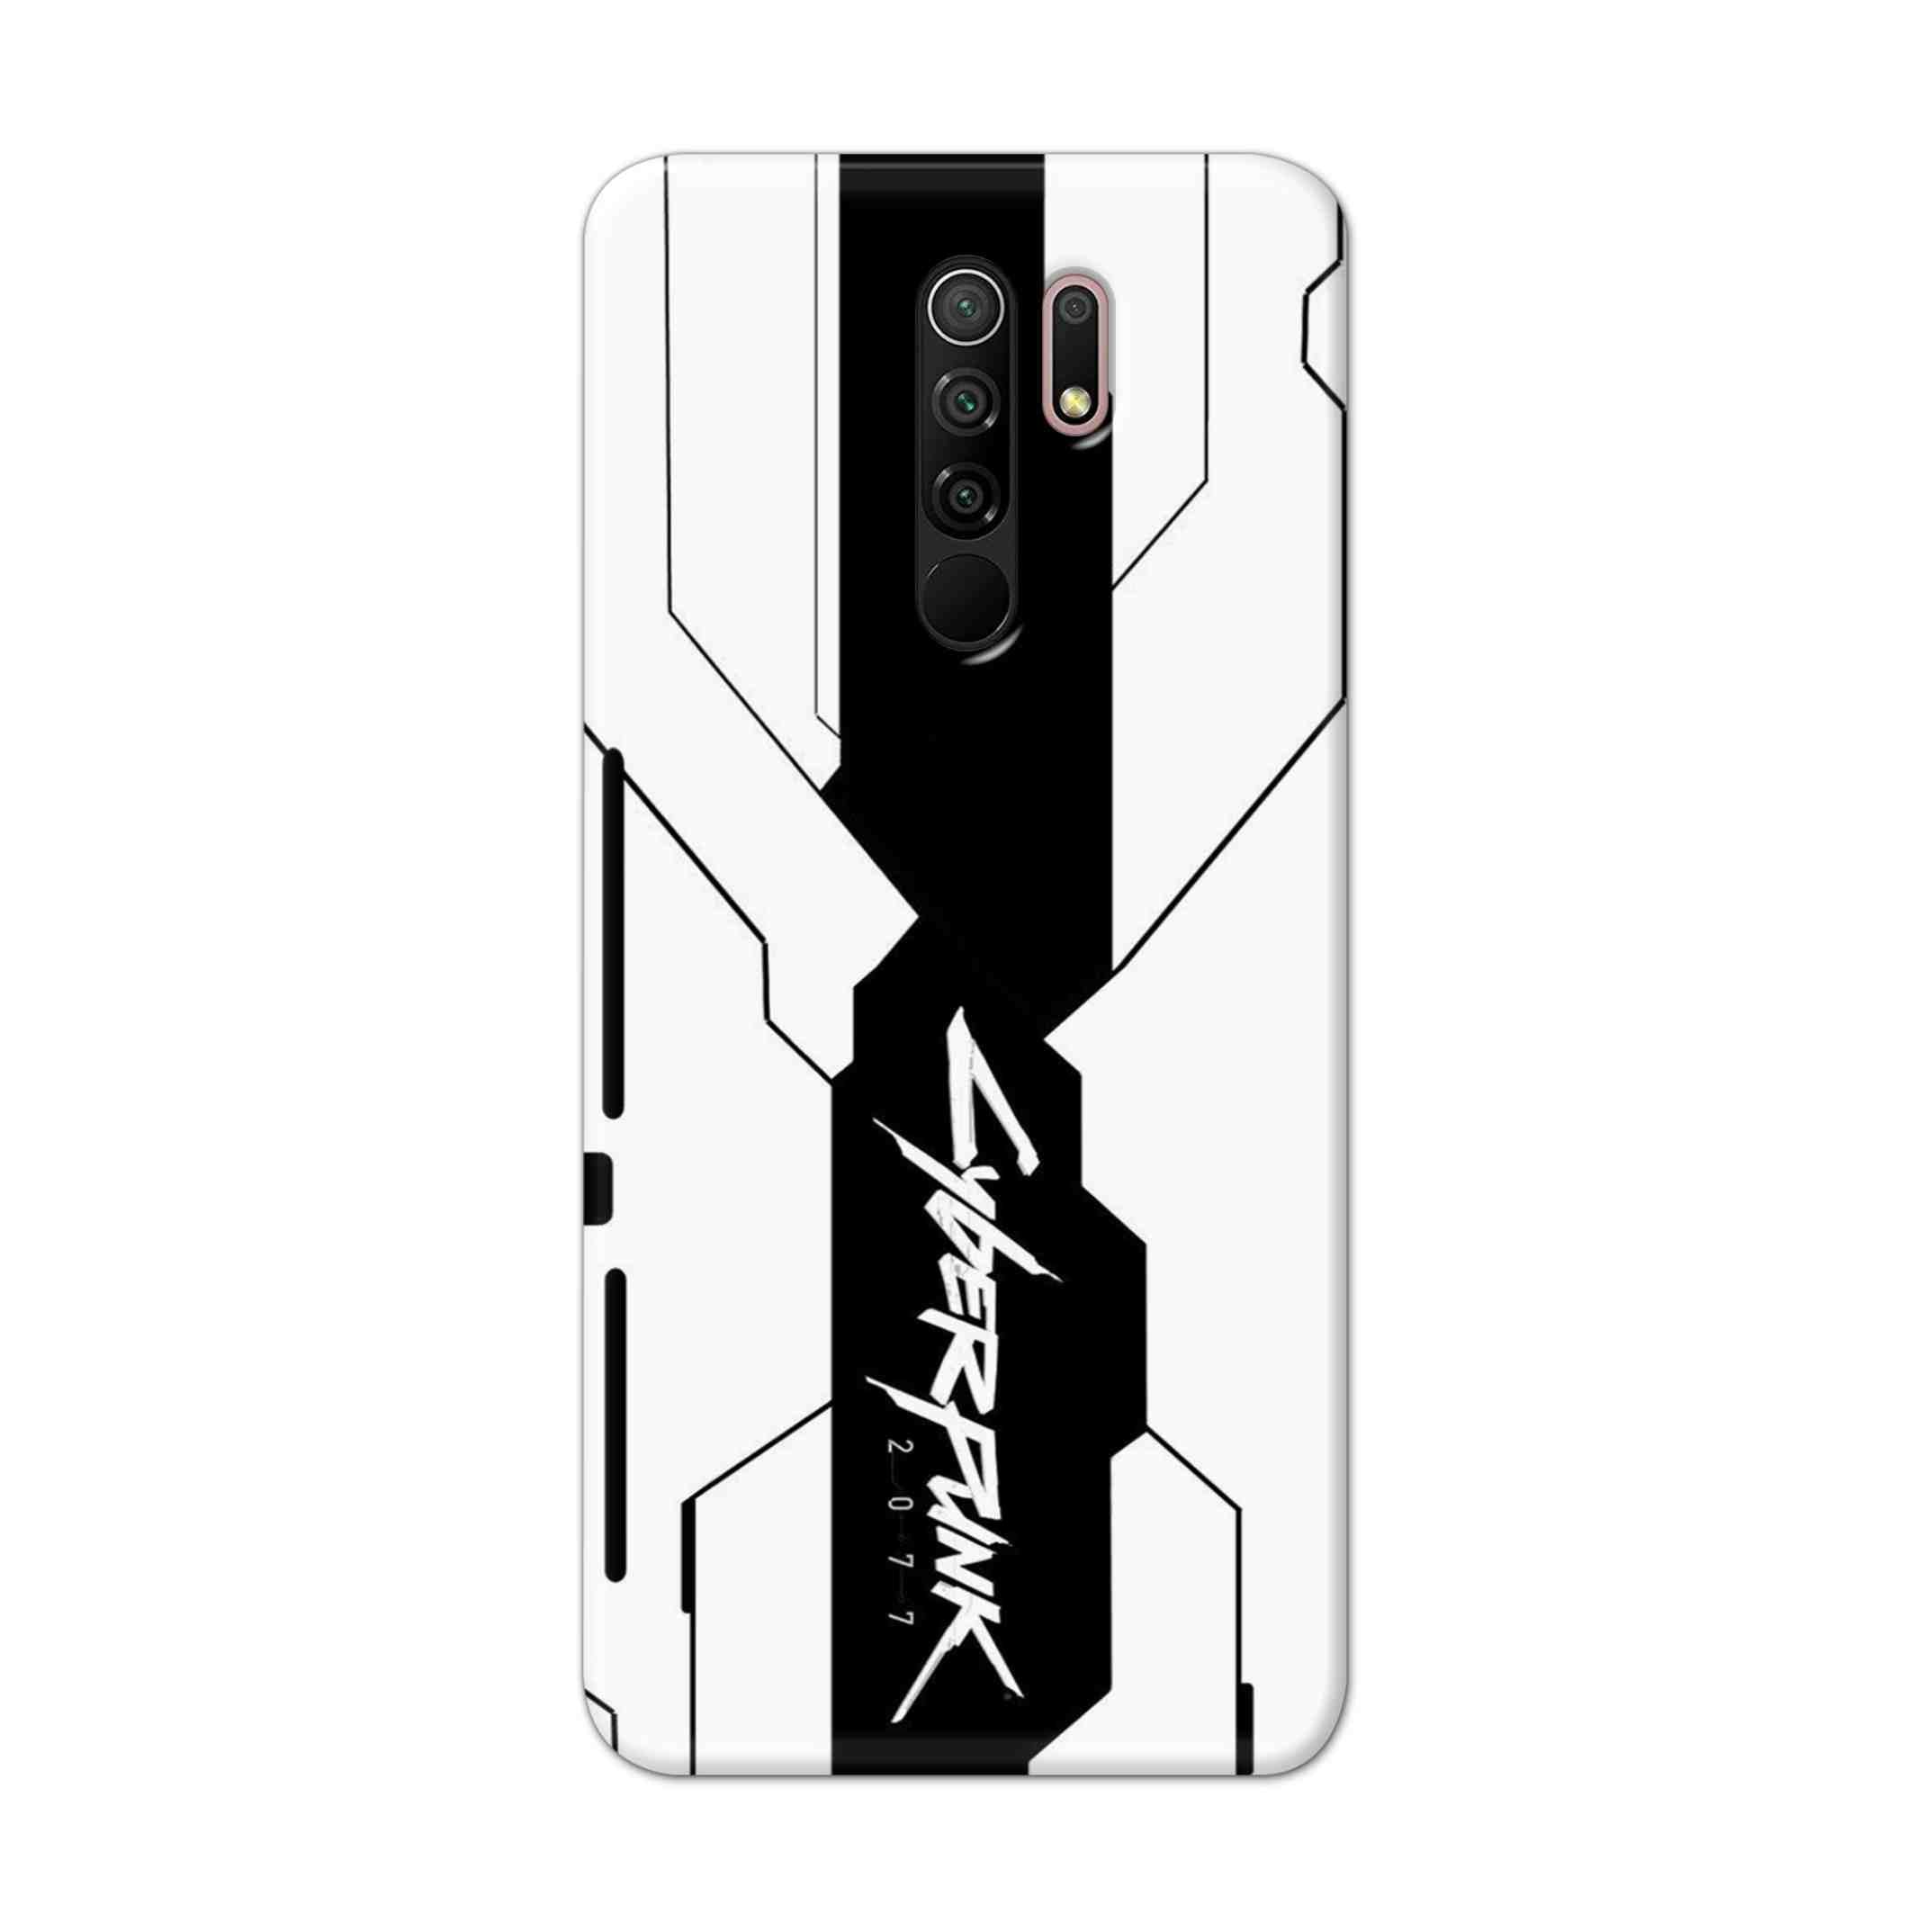 Buy Cyberpunk 2077 Hard Back Mobile Phone Case Cover For Xiaomi Redmi 9 Prime Online